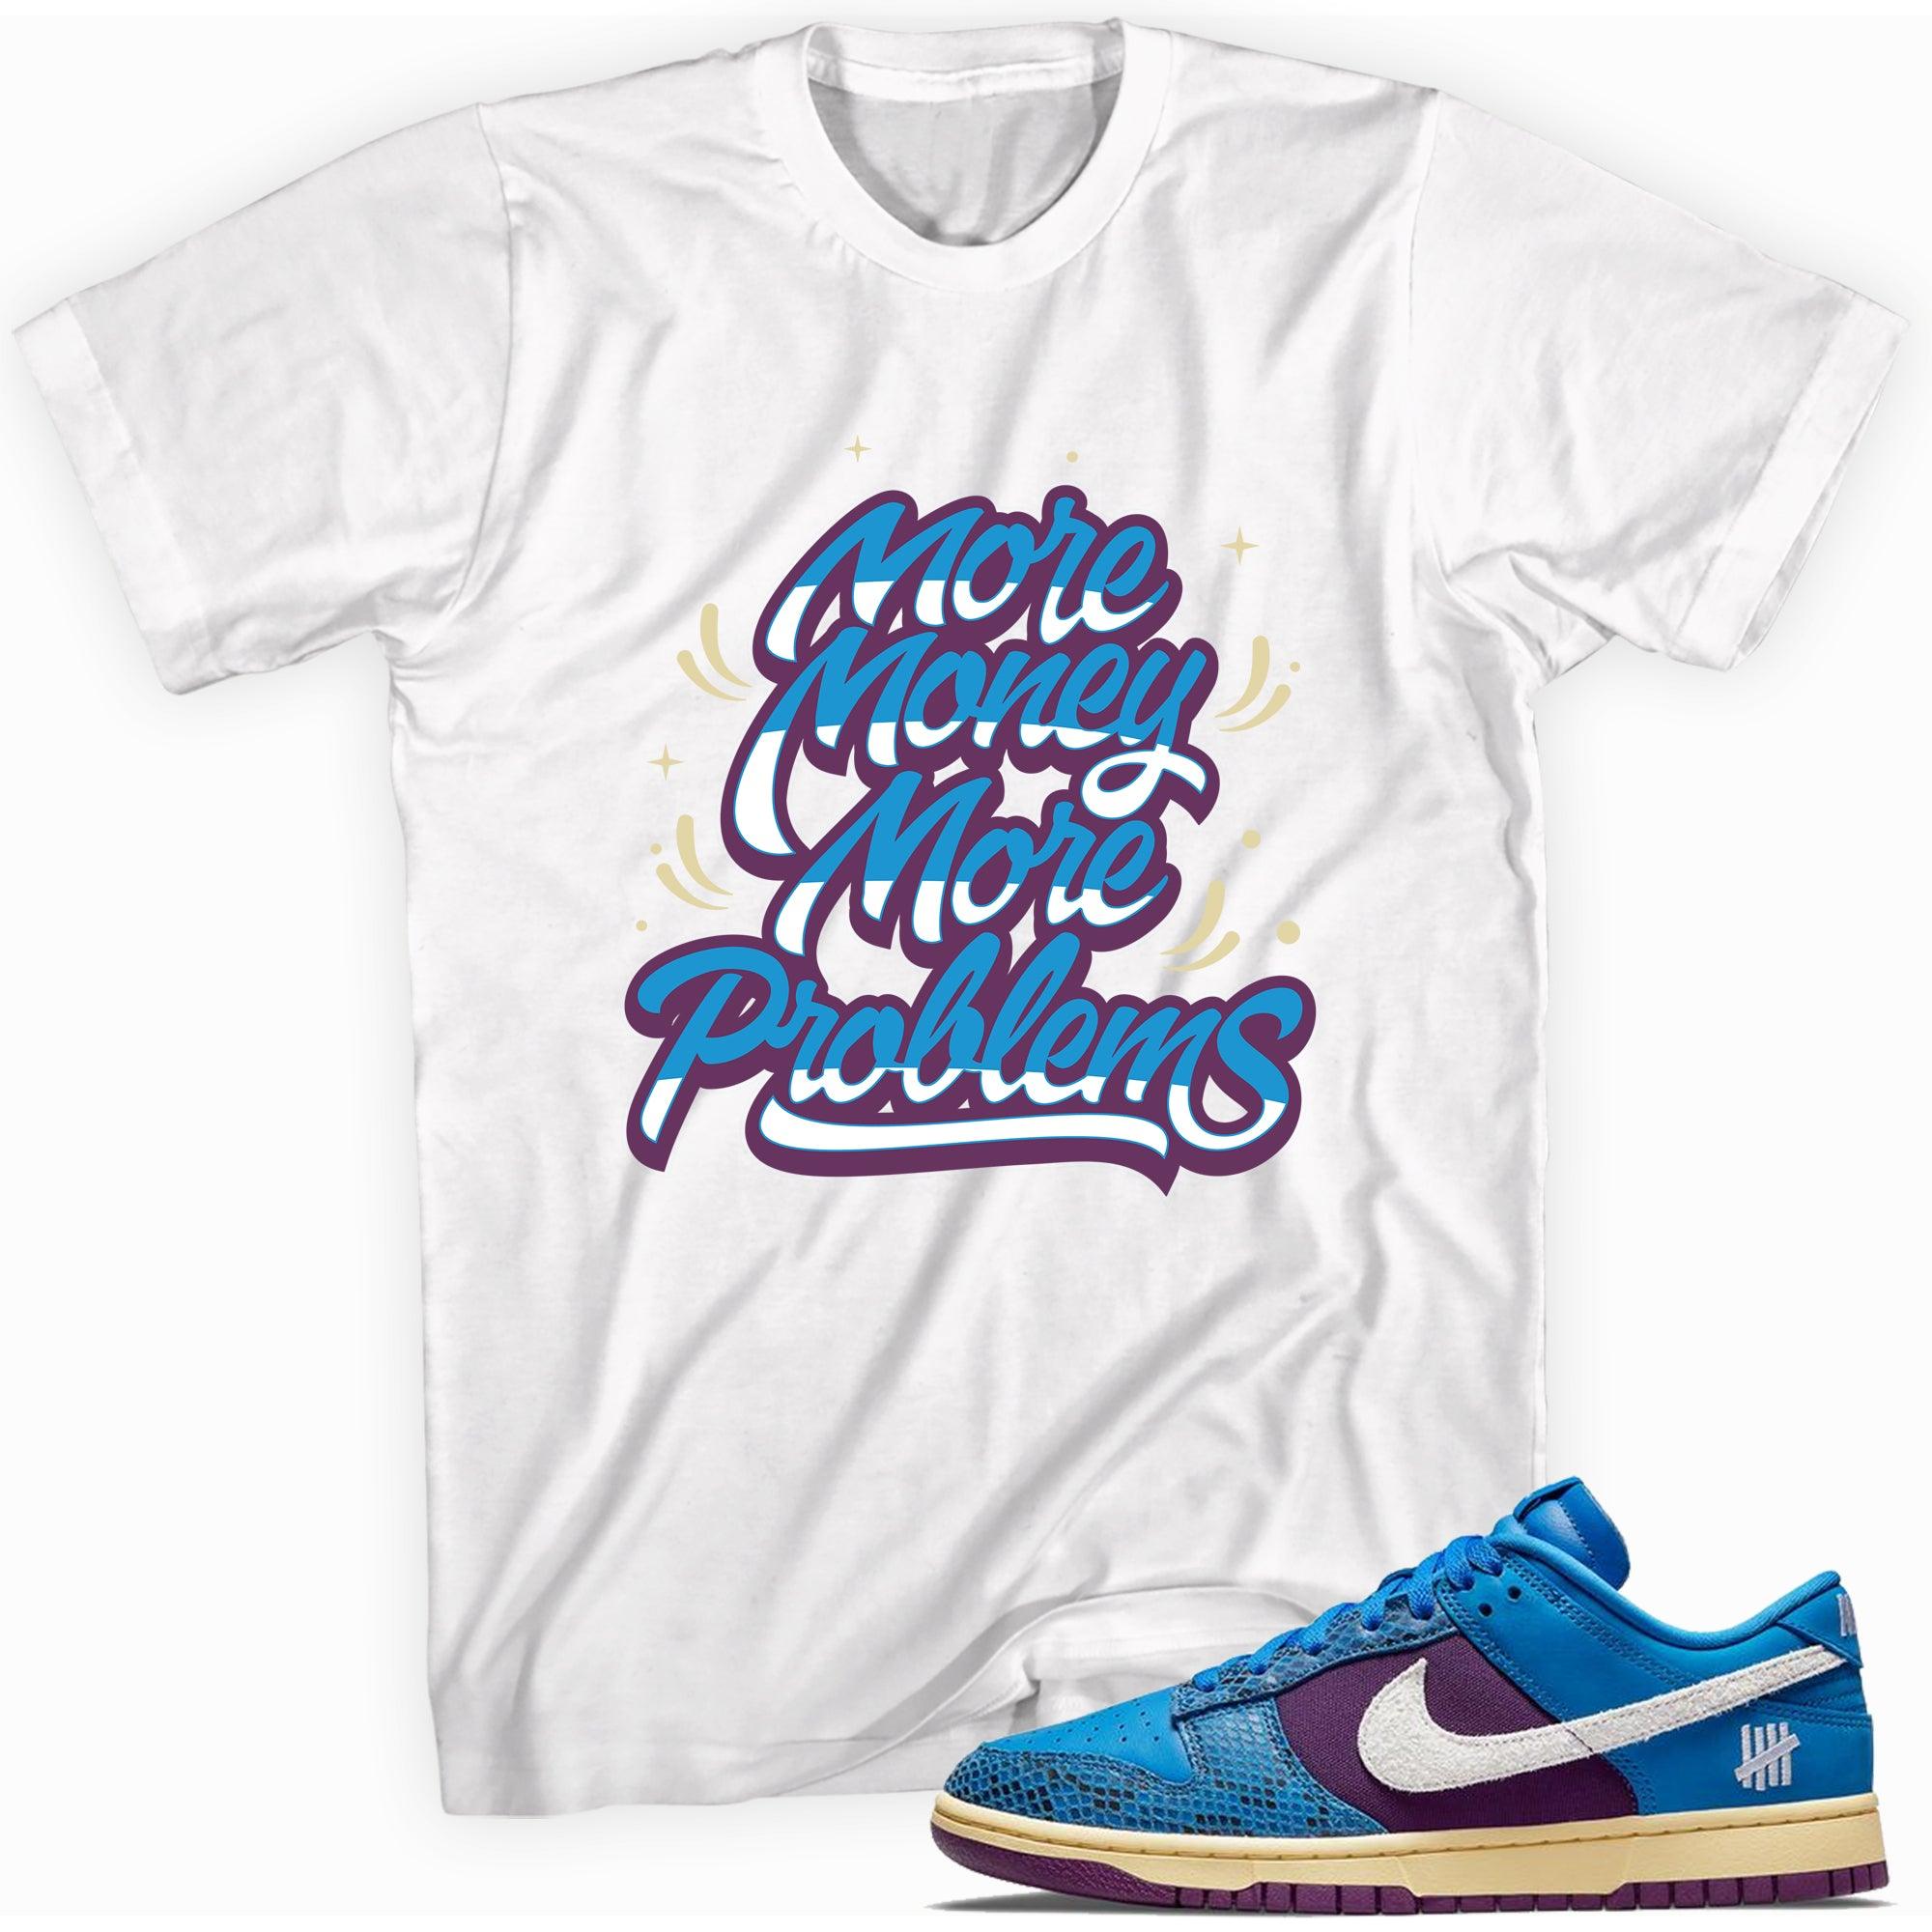 More Money More Problems Shirt Dunk Low Undefeated 5 On It Dunk vs AF1 photo